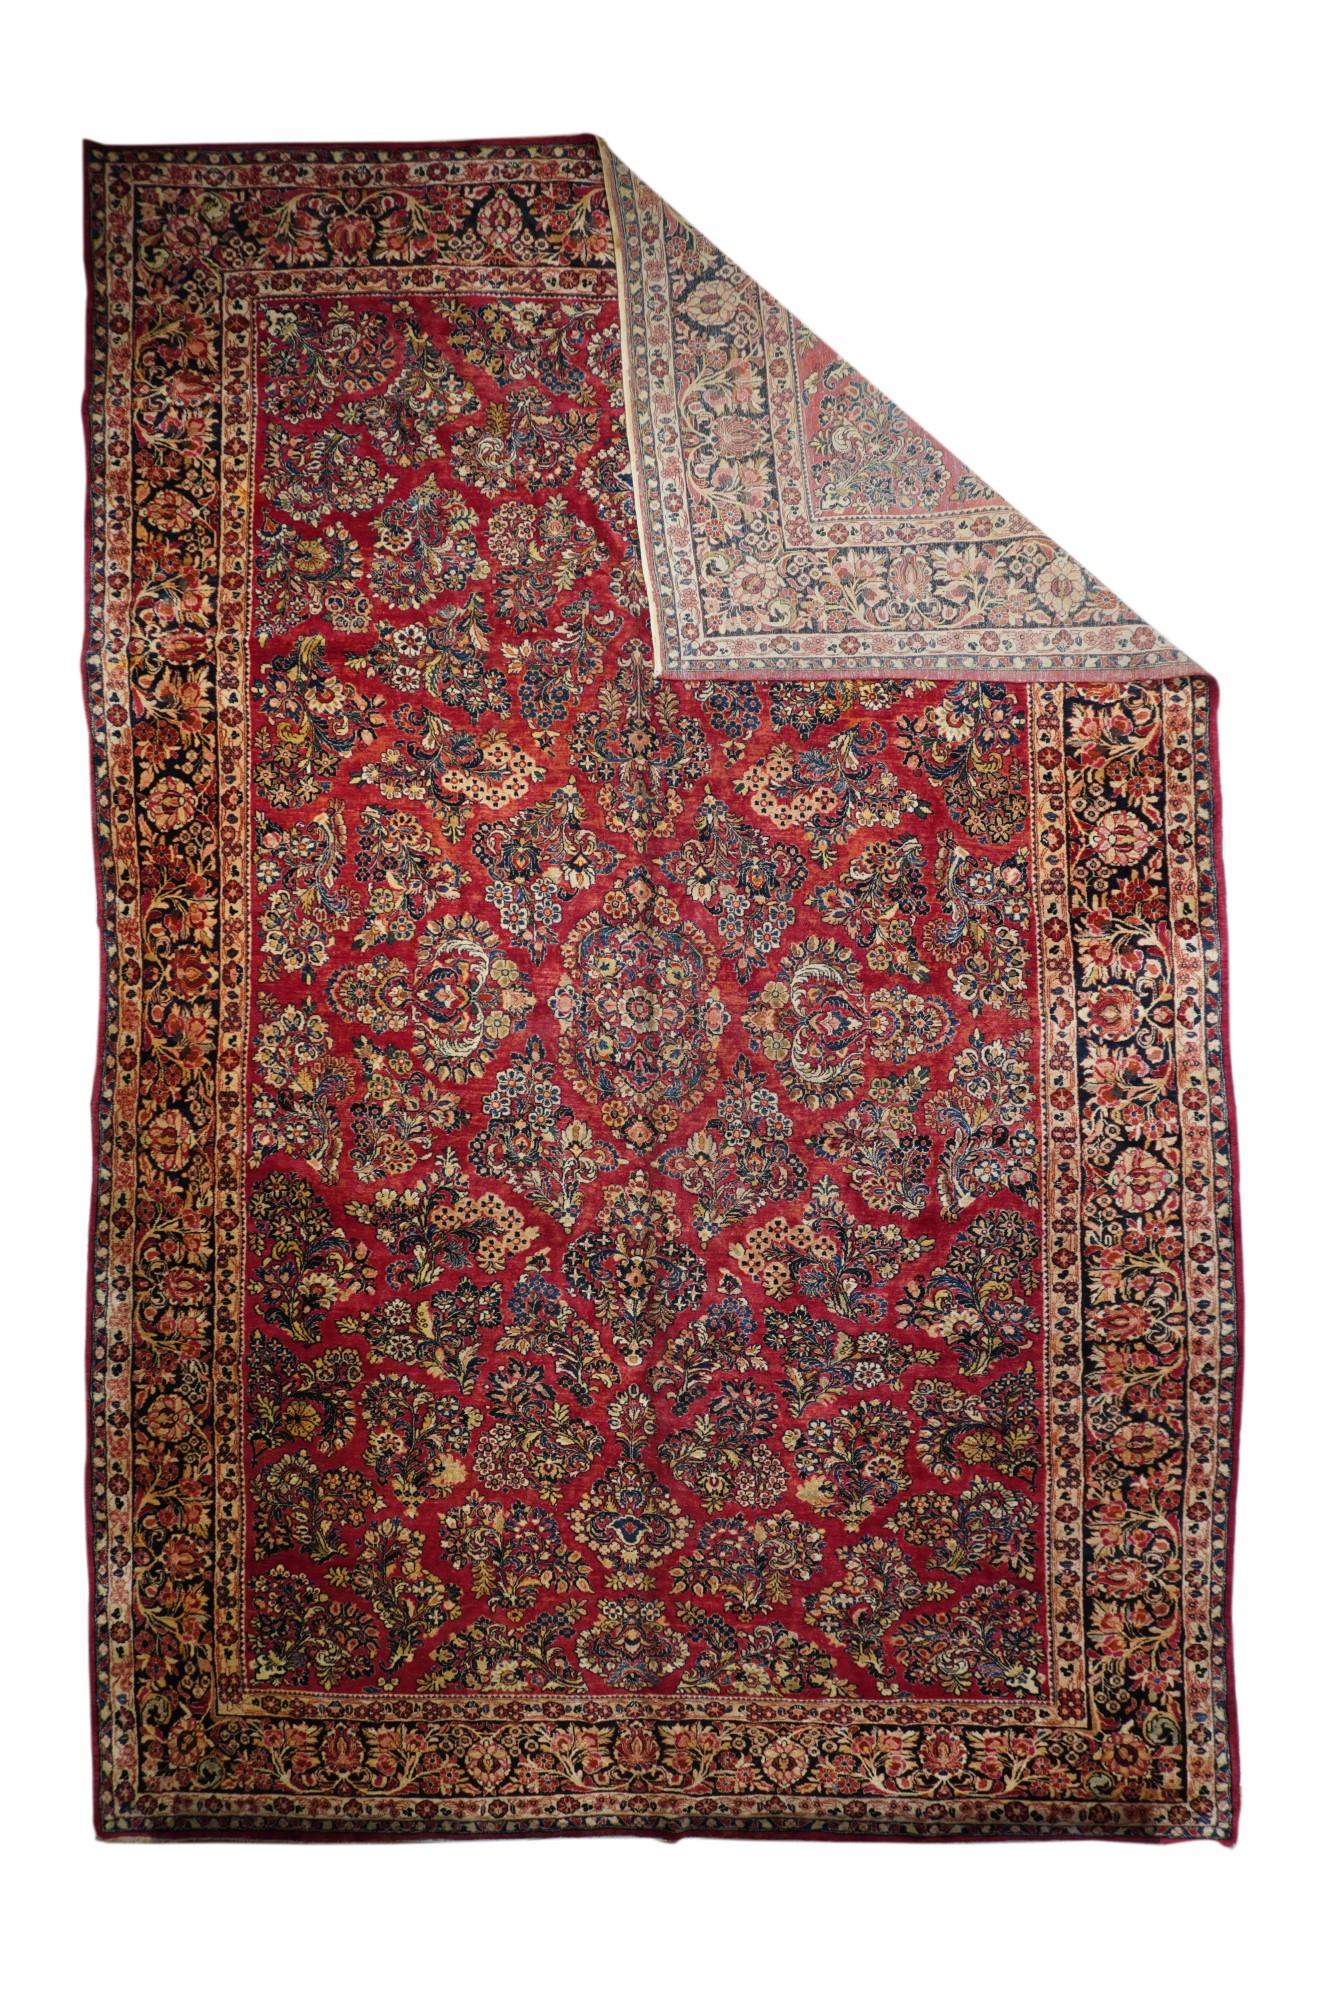 This 30's west Persian well-woven village carpet, shows the characteristic 